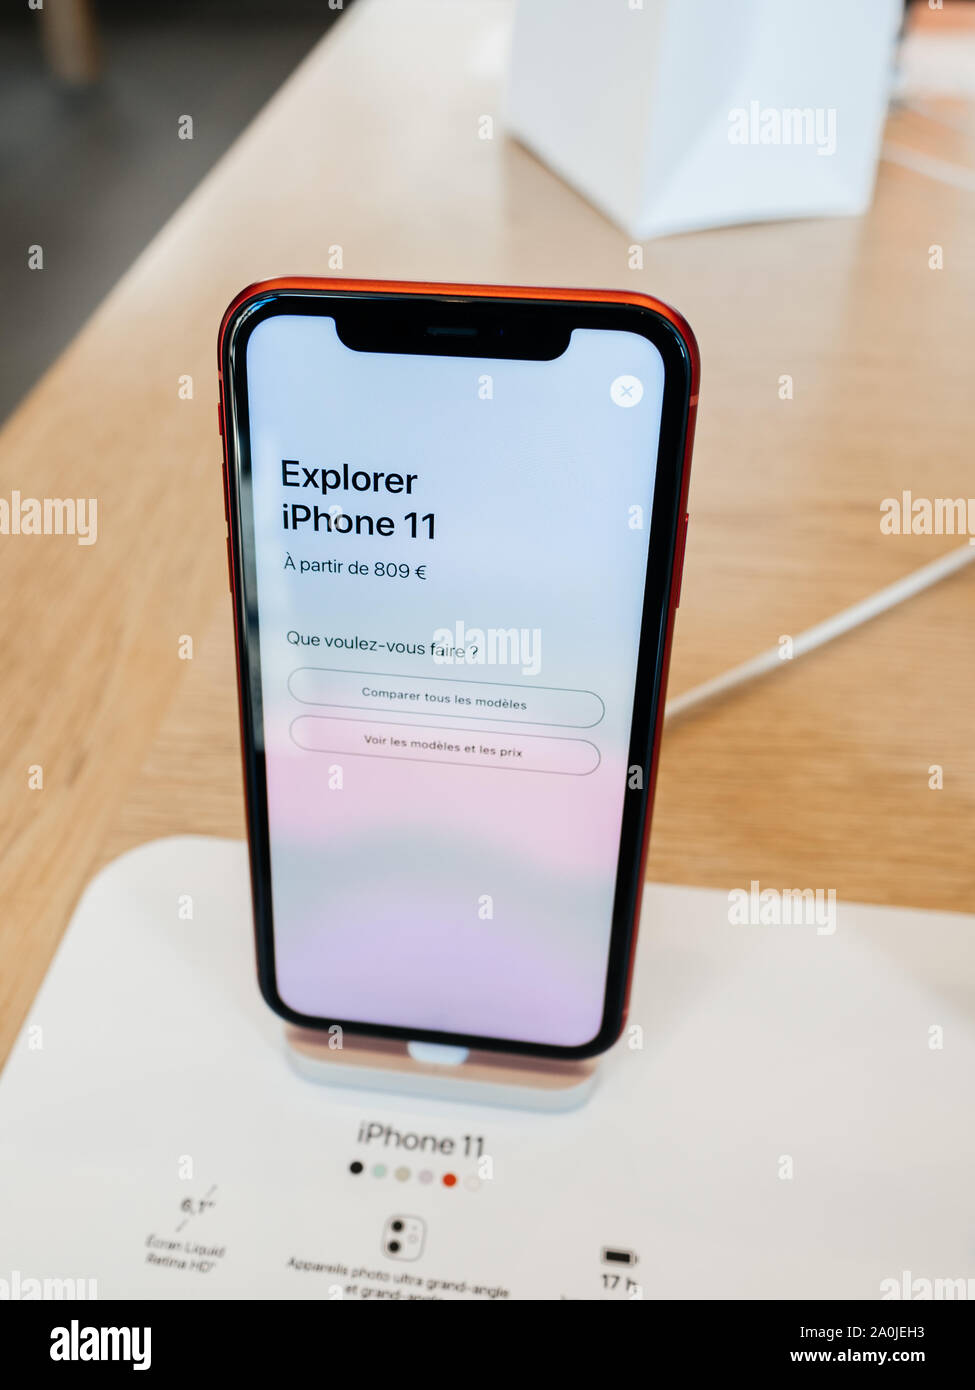 Paris, France - Sep 20, 2019: The new iPhone 11, 11 Pro and Pro Max are  displayed as the smartphone by Apple Computers goes on sale with starting  price of 809 euros in Europe Stock Photo - Alamy